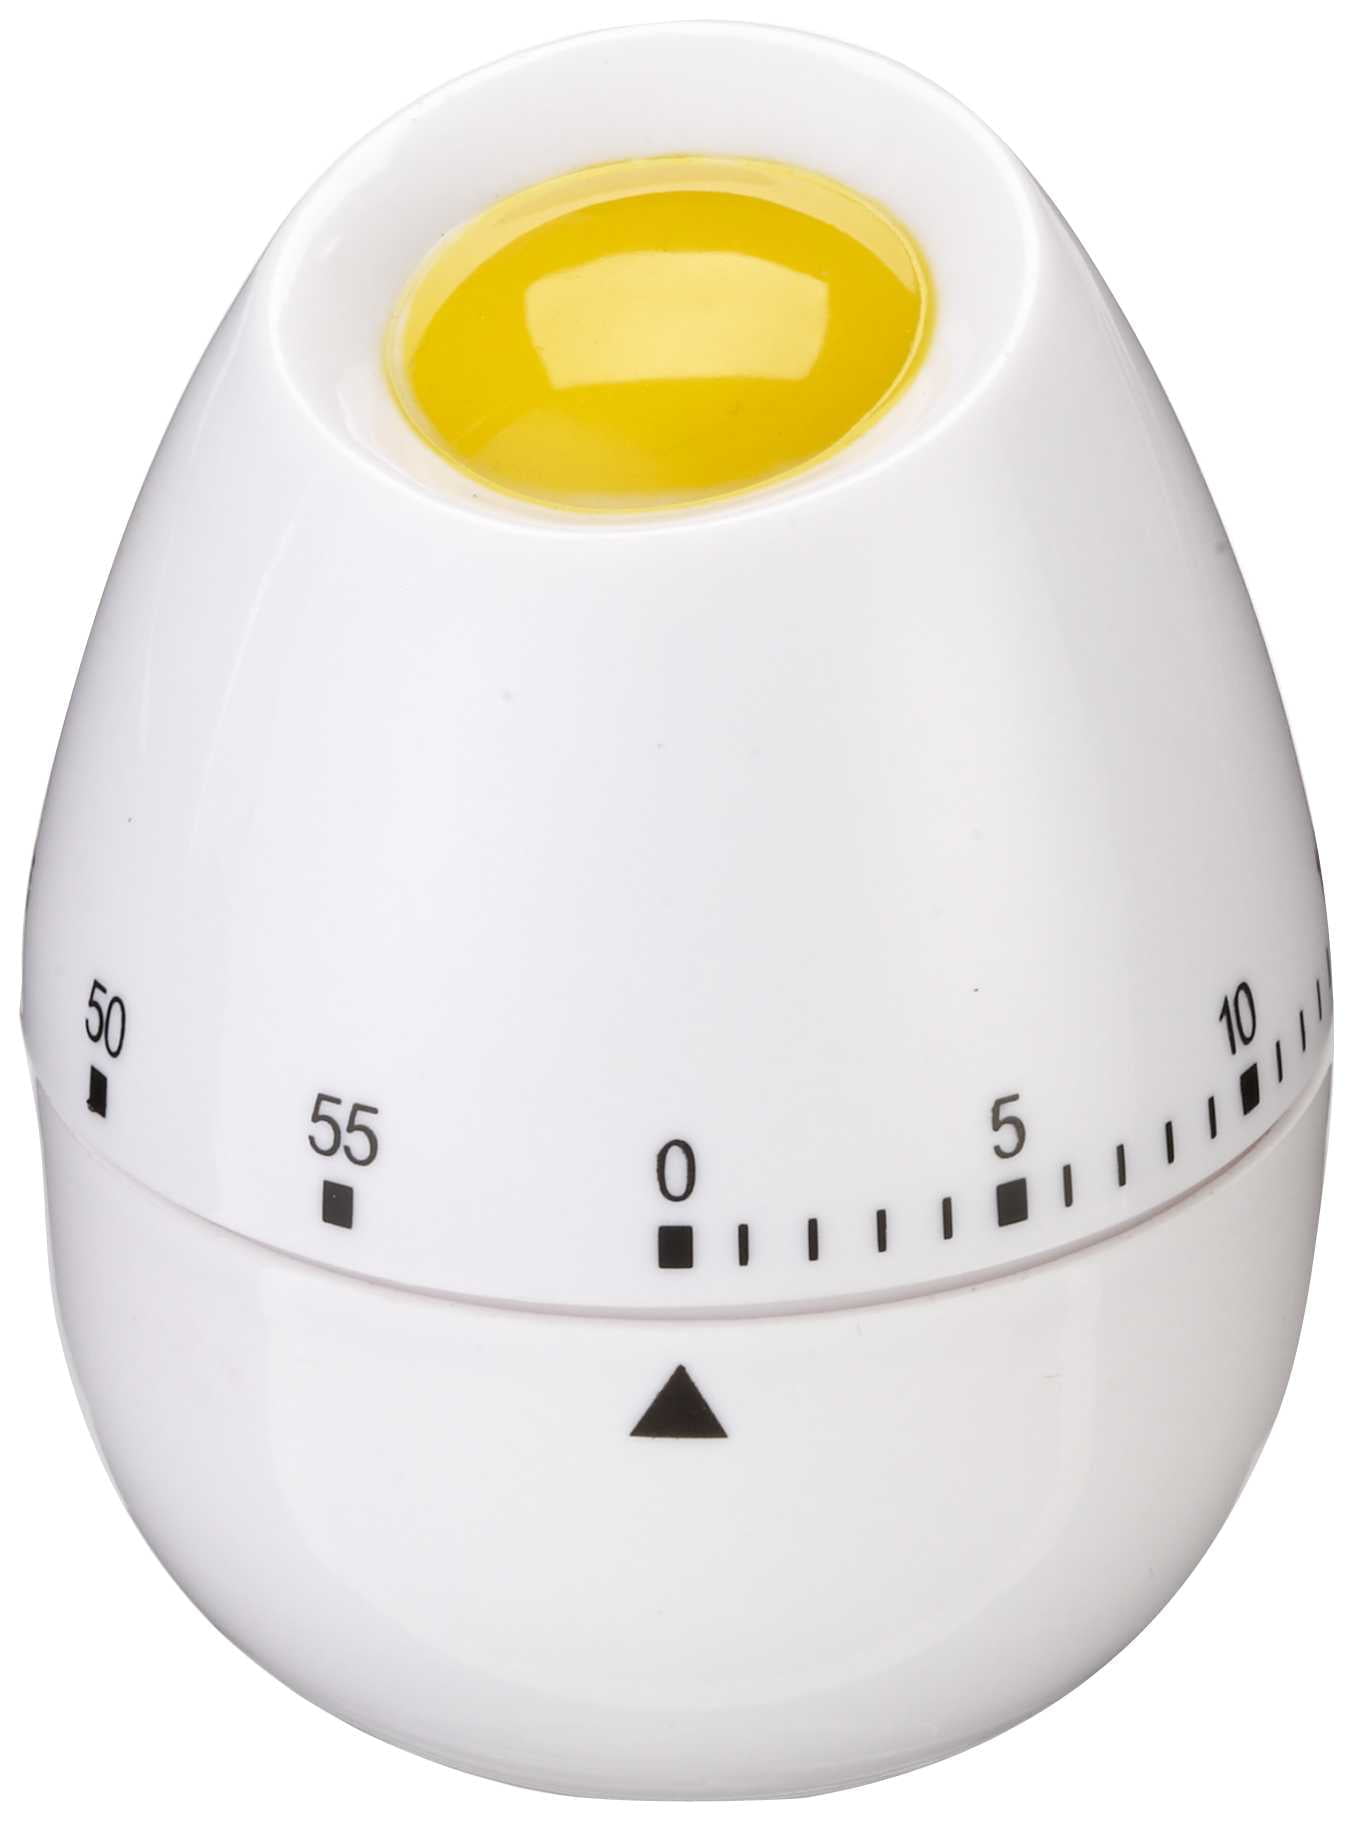 Tohuu Kitchen Timers for Cooking Egg Kitchen Timer for Cooking Kitchen  Timer Cooking Timer Reminder Timer Rotating Alarm for Cooking Oven Baking  appealing 